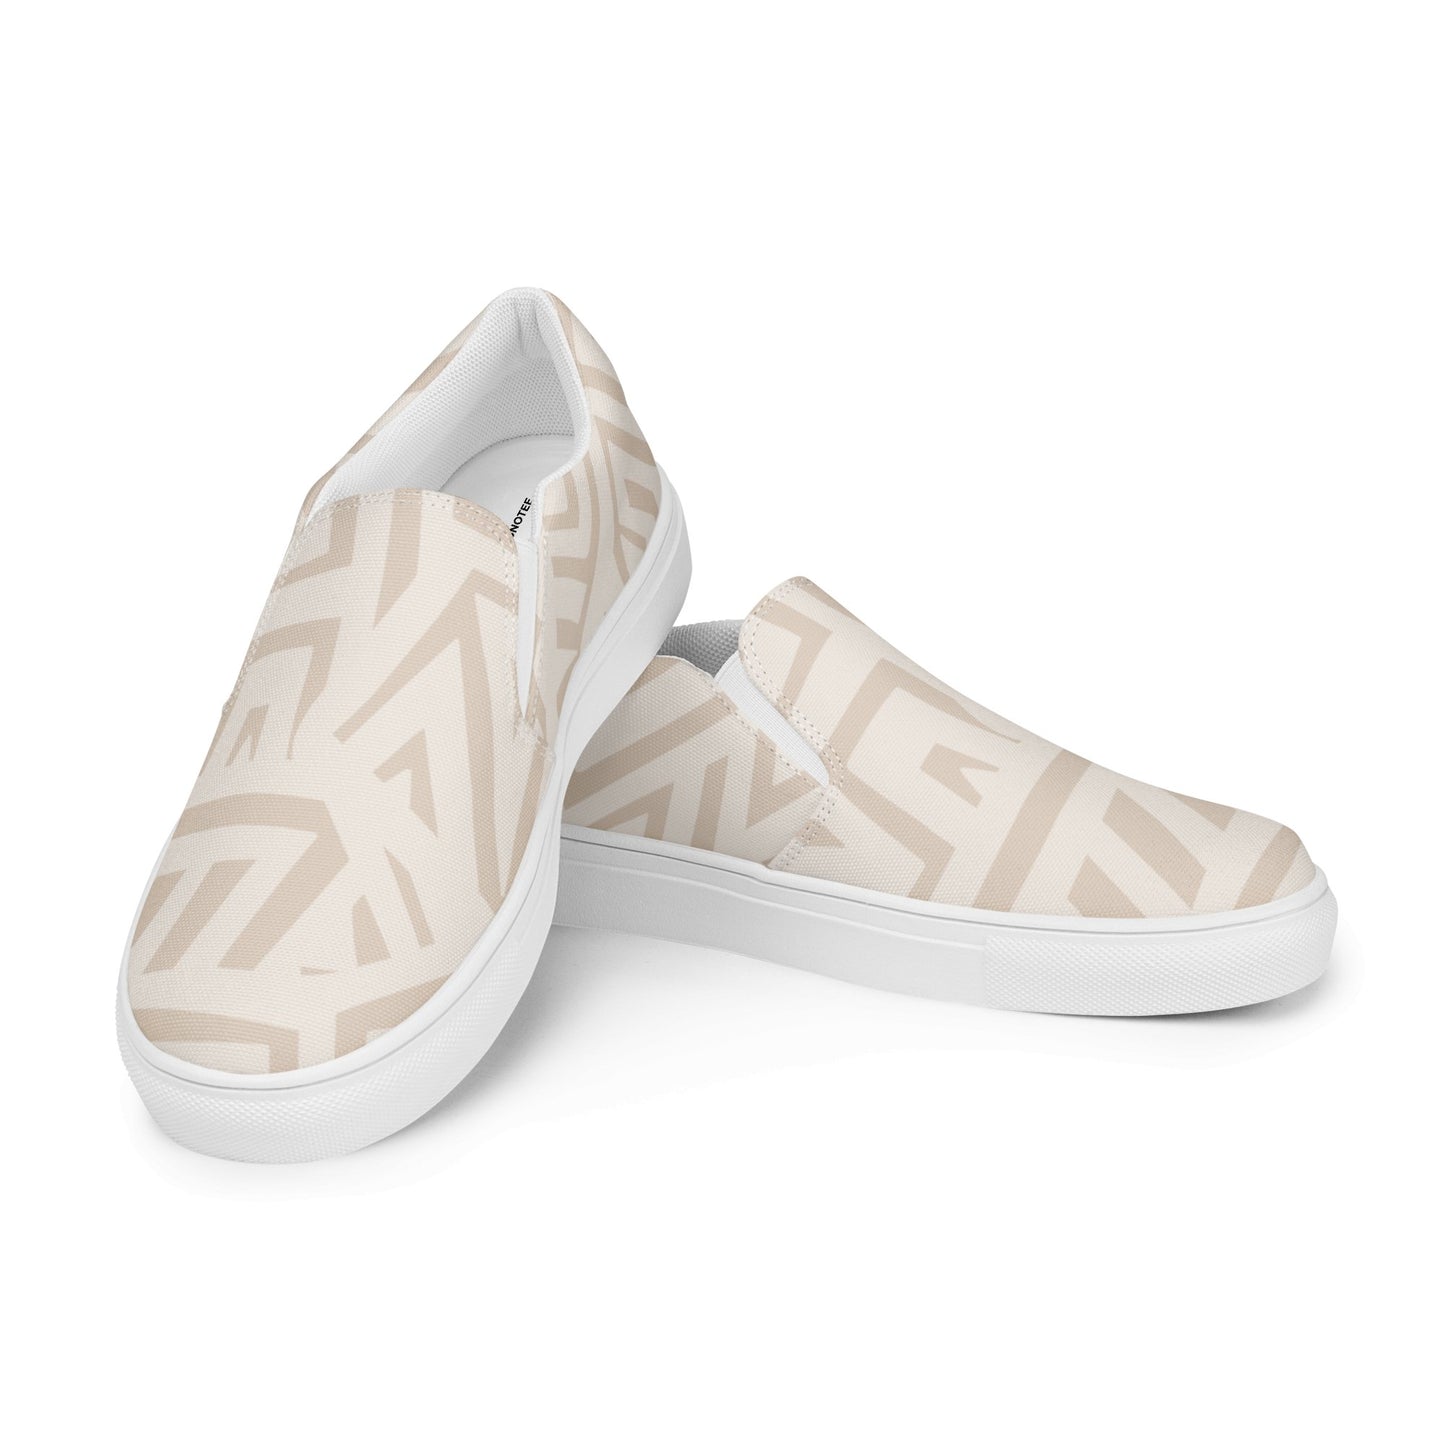 Abstract Ethnic Style - Women’s Slip-on Canvas Shoes - Bonotee